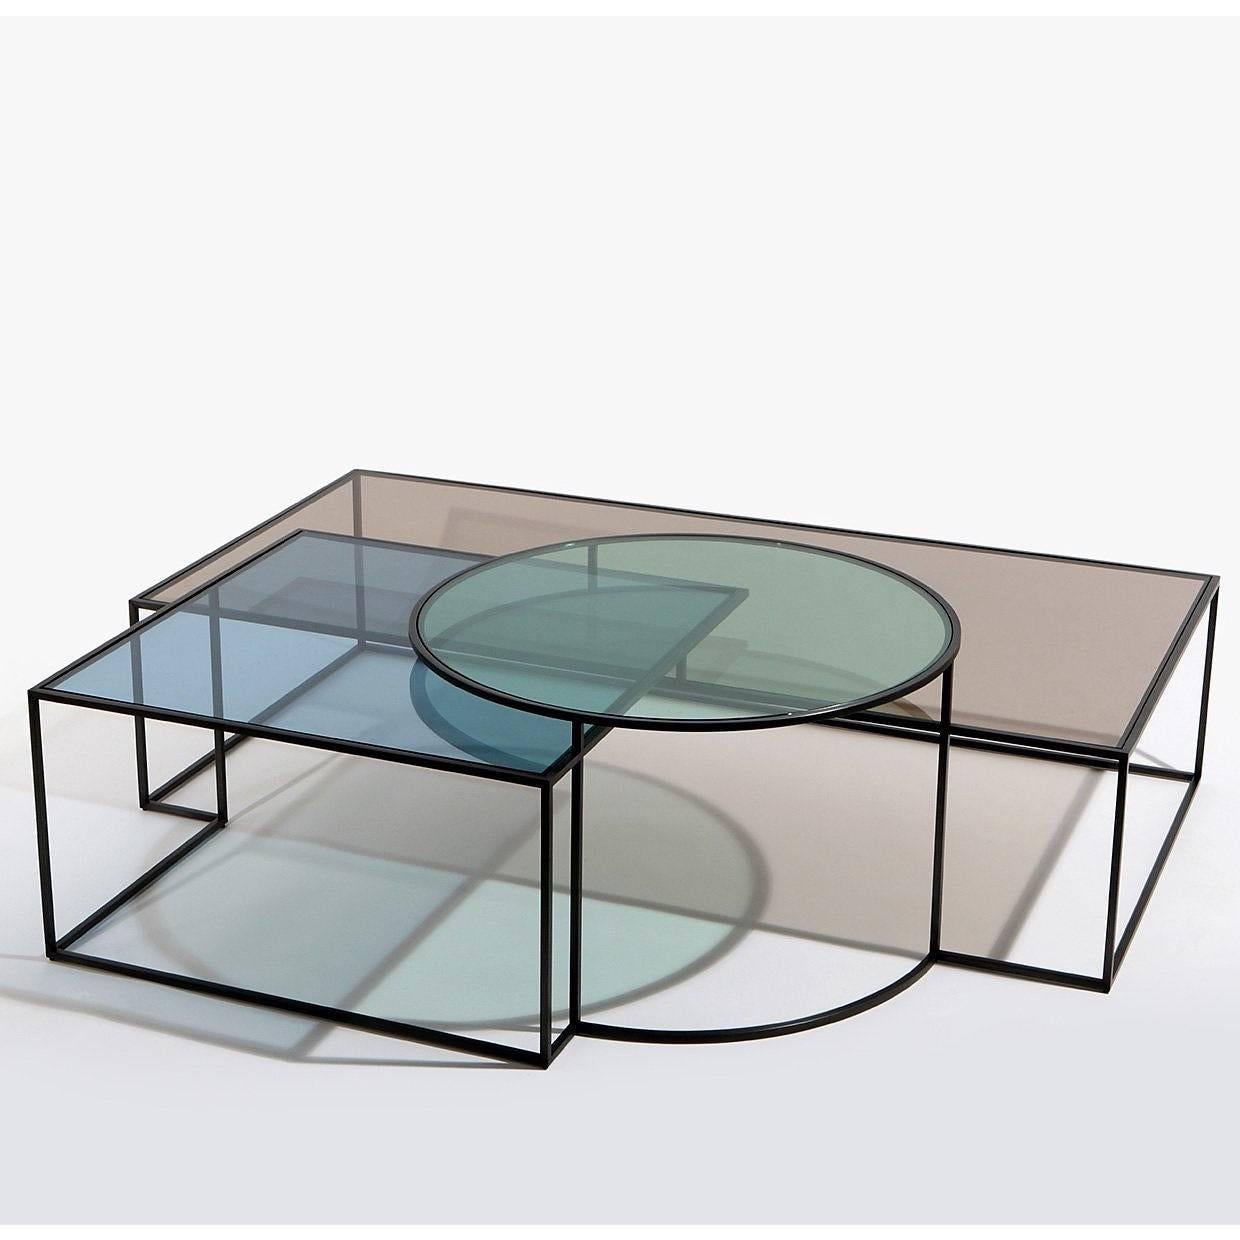 The Geometrik coffee table by the architect Nada Debs is a composition of three geometric shapes. Shadows are created through the overlapping of forms. Blackened steel frame glass: Colored in three soft shades of red, blue and green.

Dimensions: